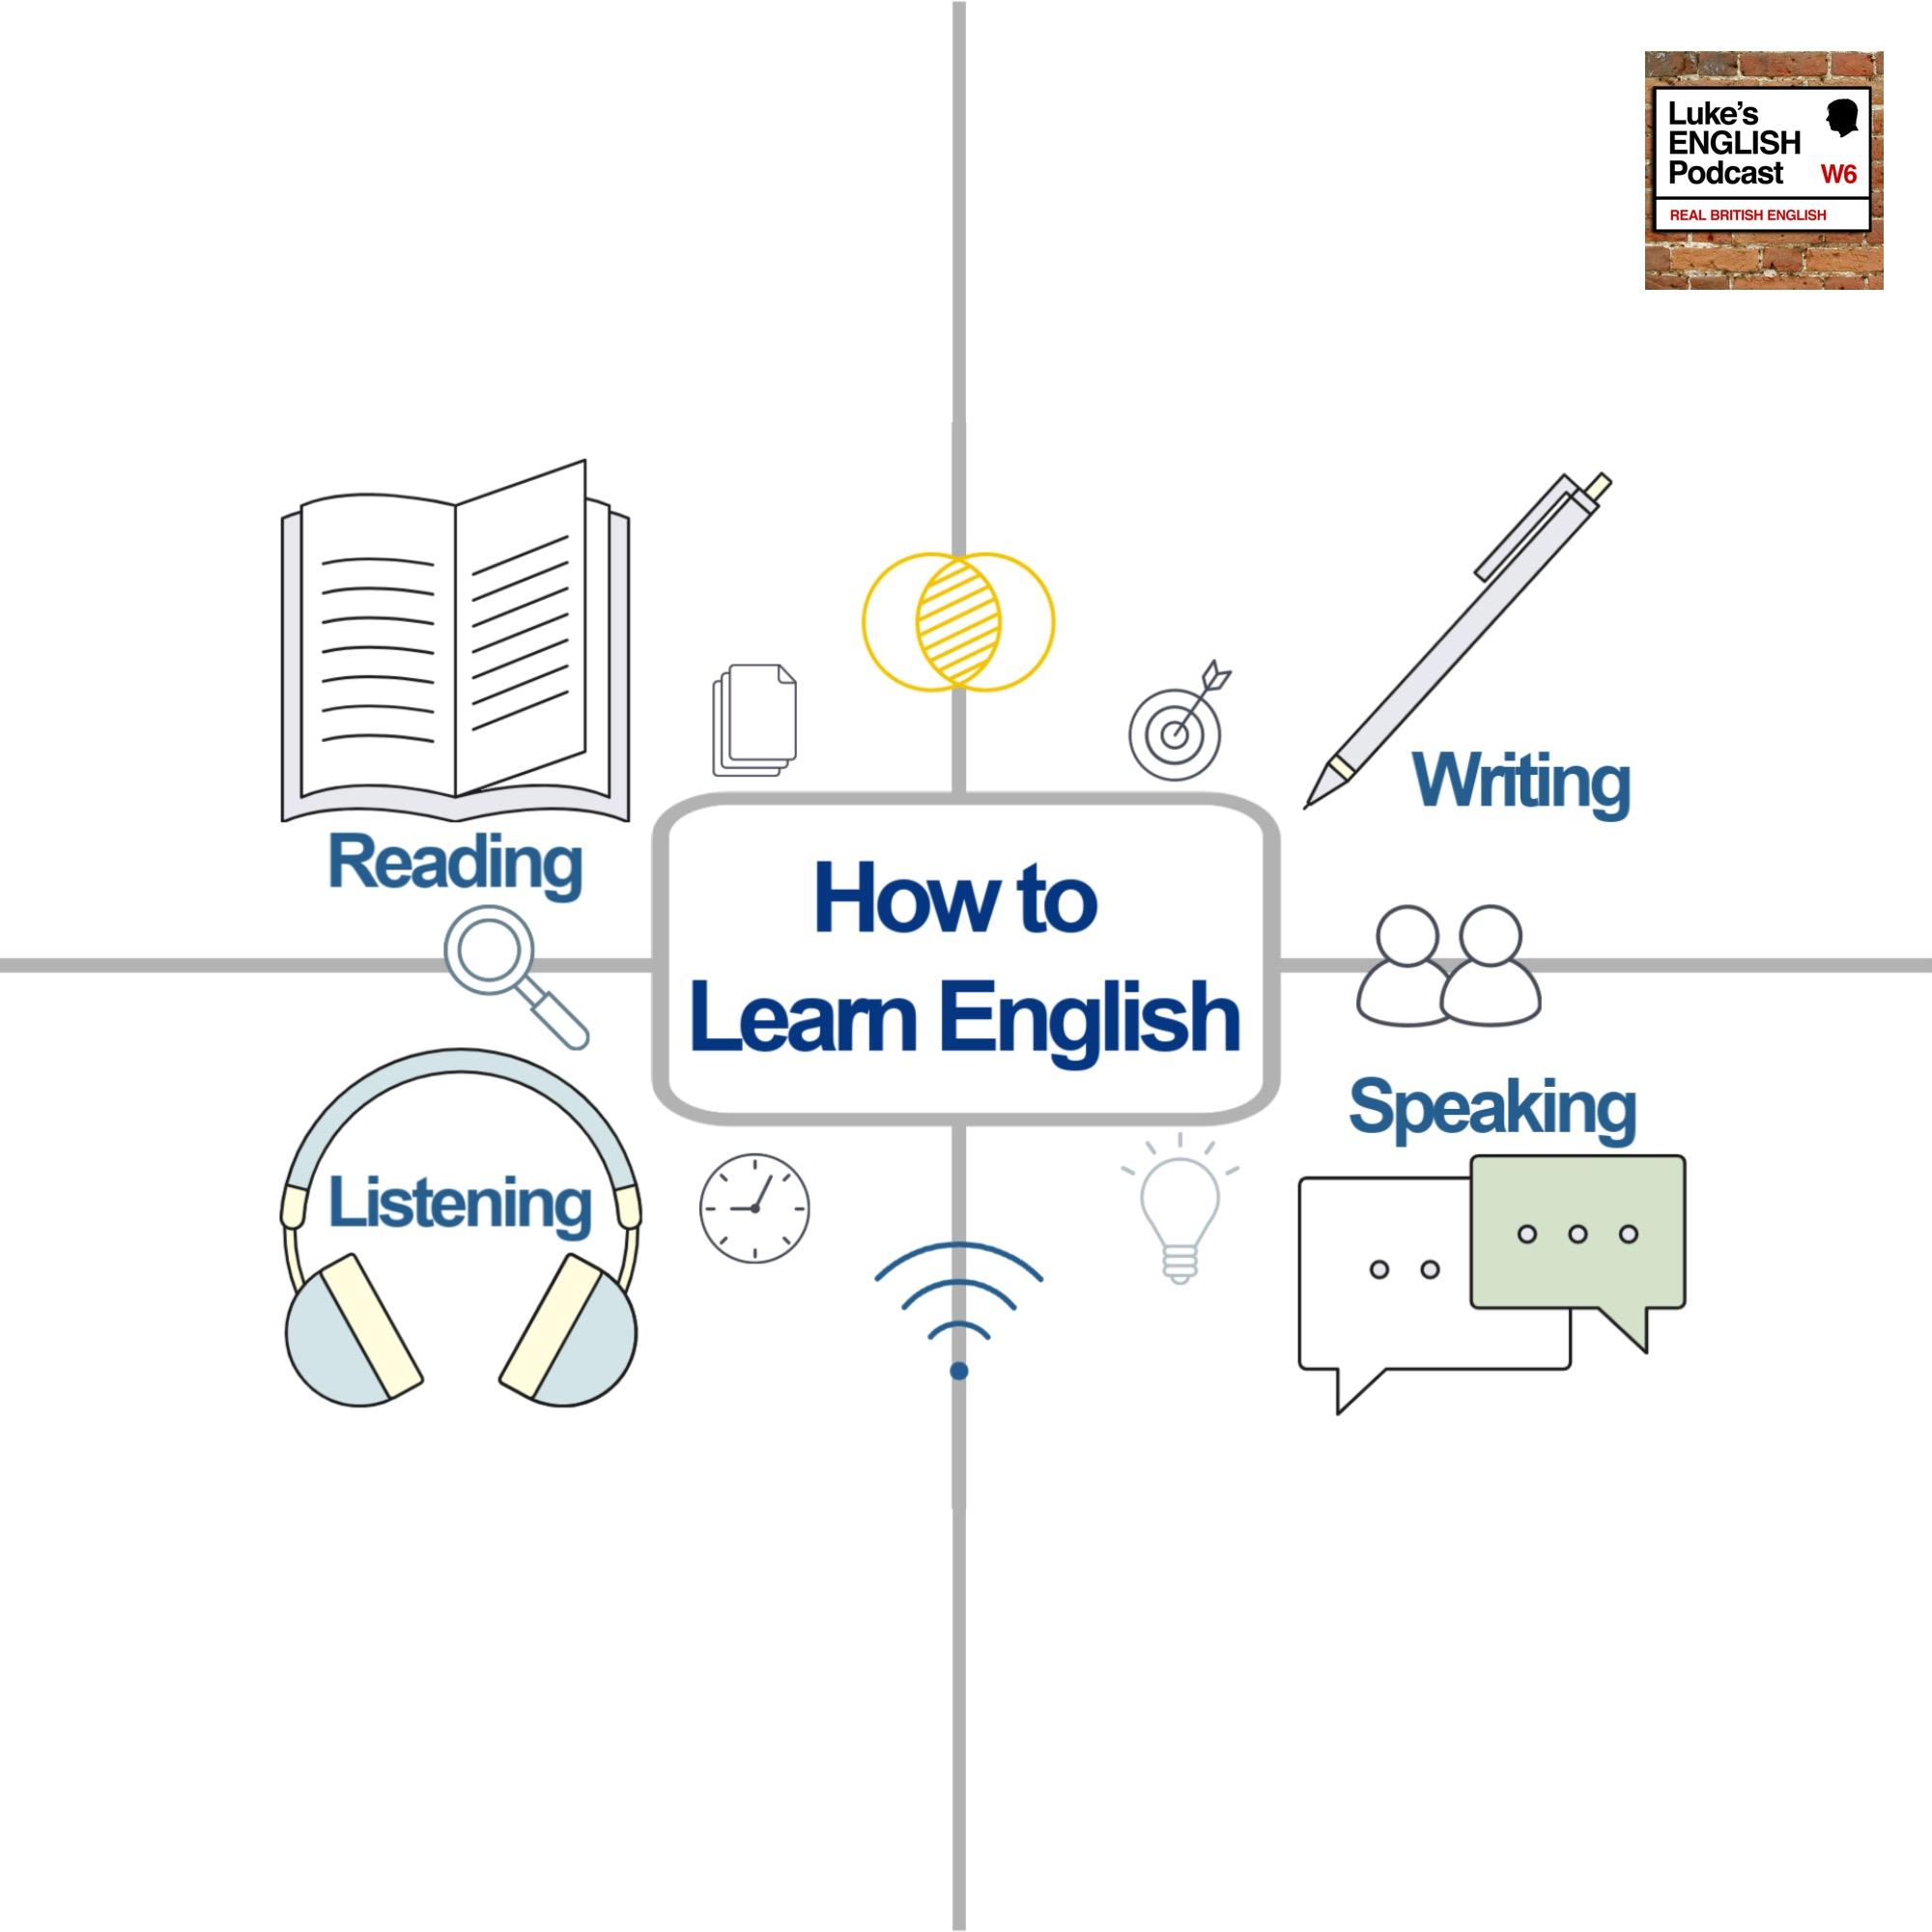 669. How to Learn English